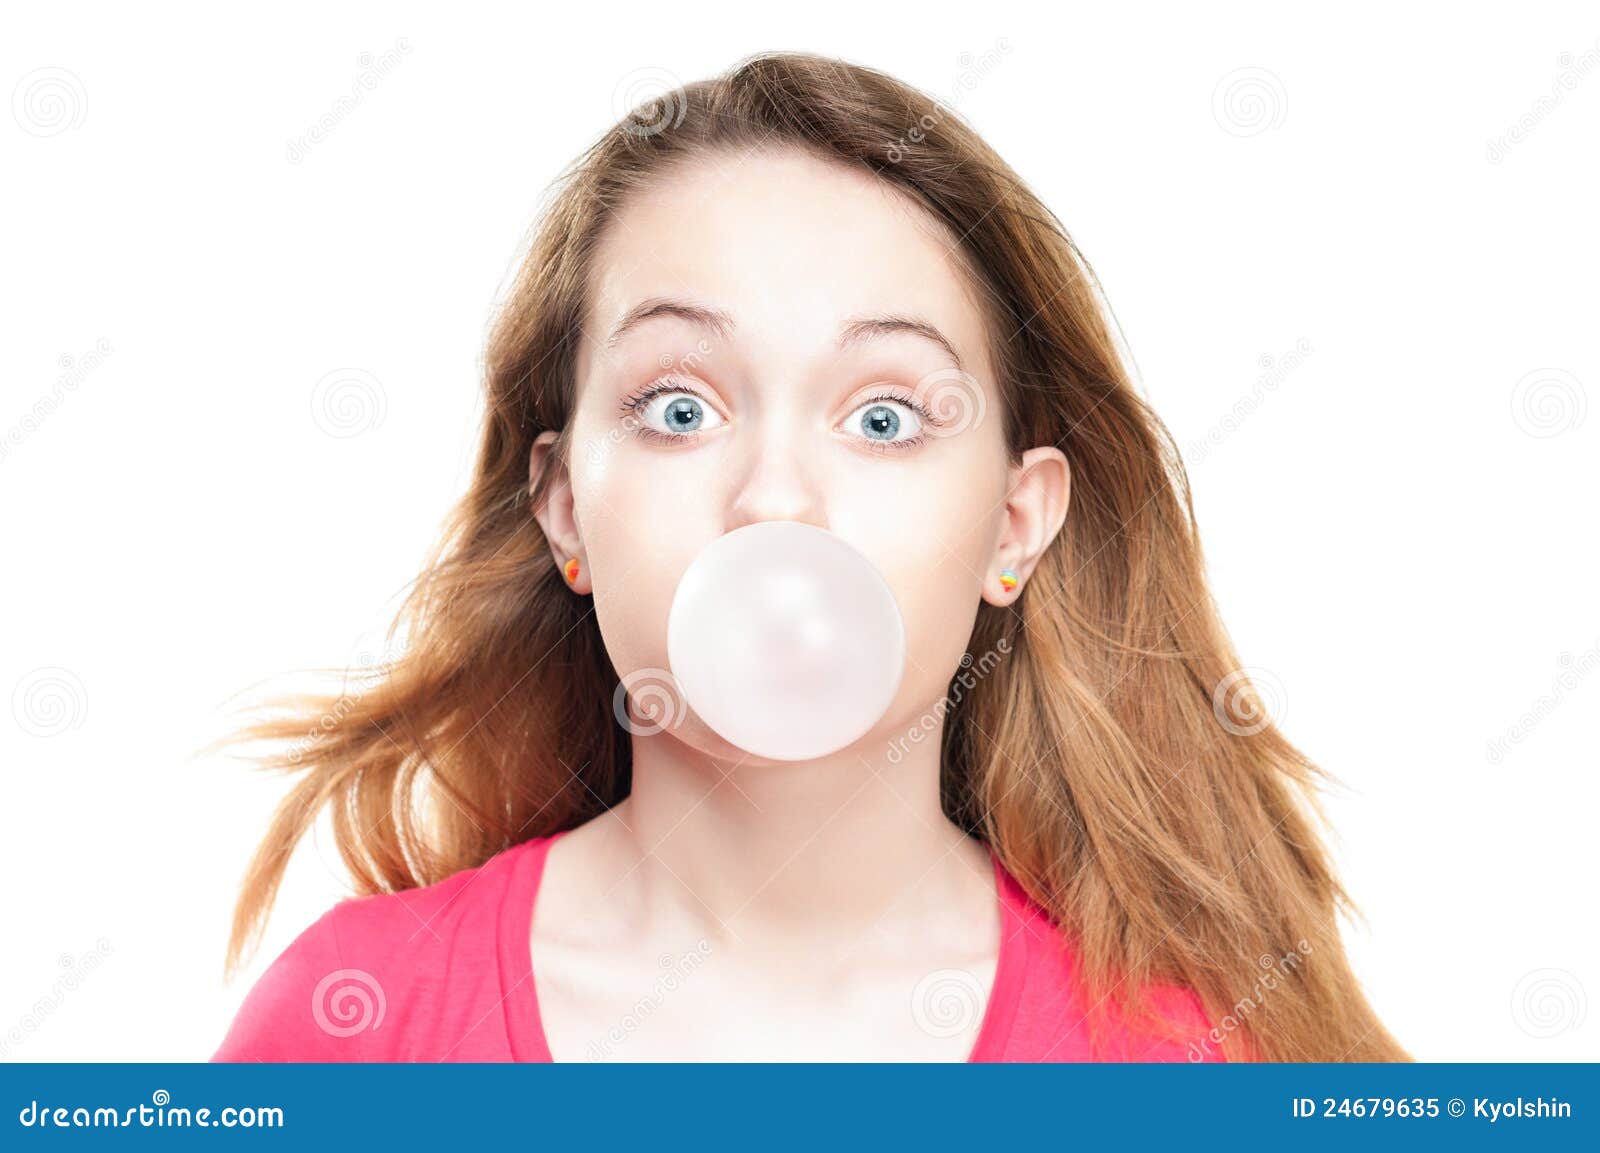 girl blowing bubble from chewing gum